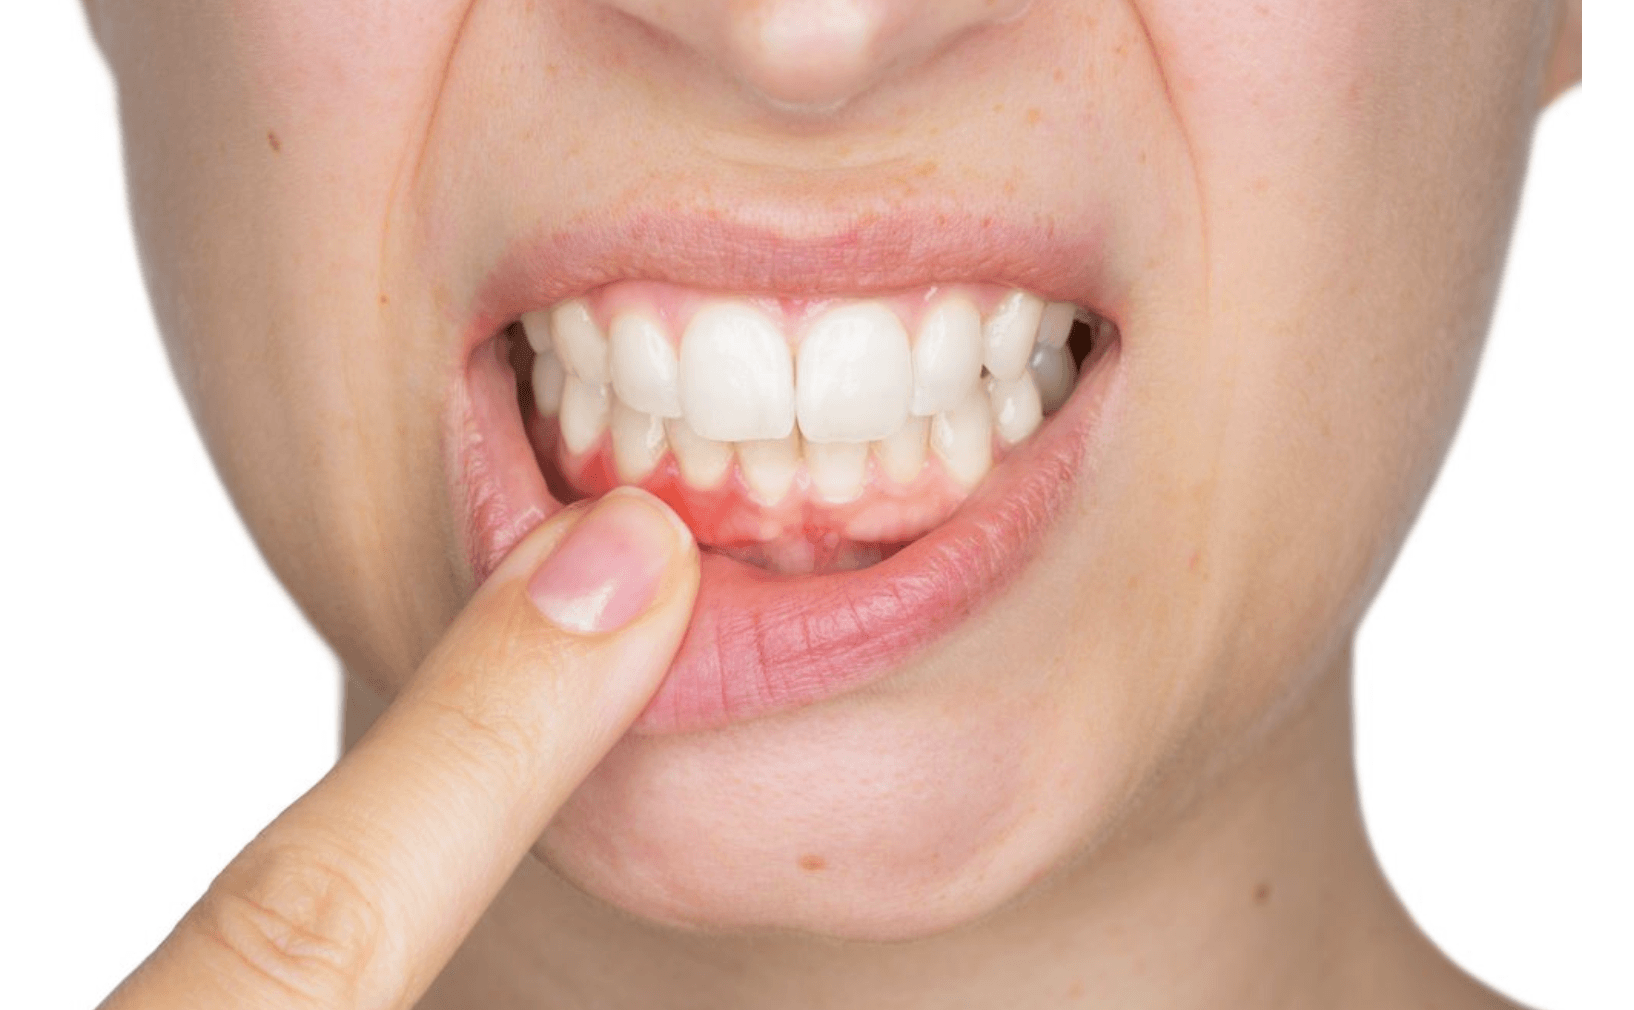 FAQ: " My Gums Are Swollen Above a Tooth â Do I Have an Abscess?"